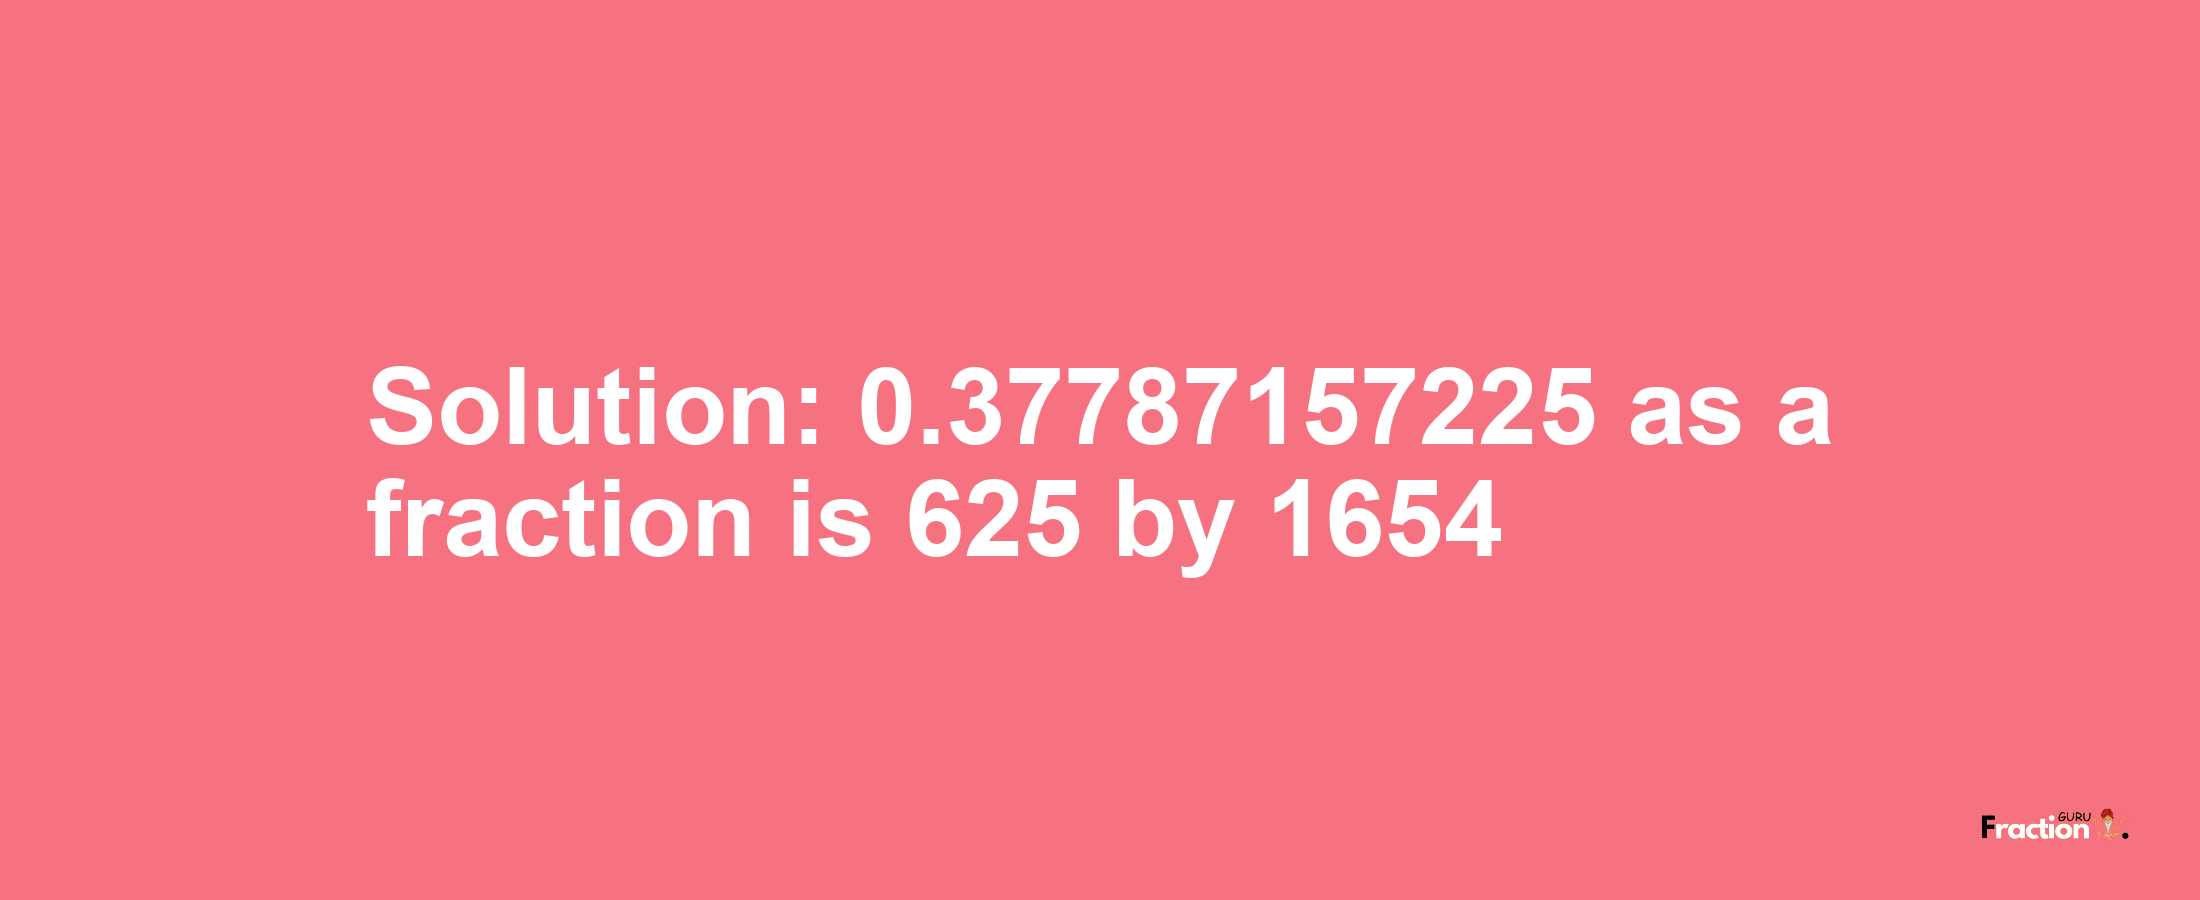 Solution:0.37787157225 as a fraction is 625/1654